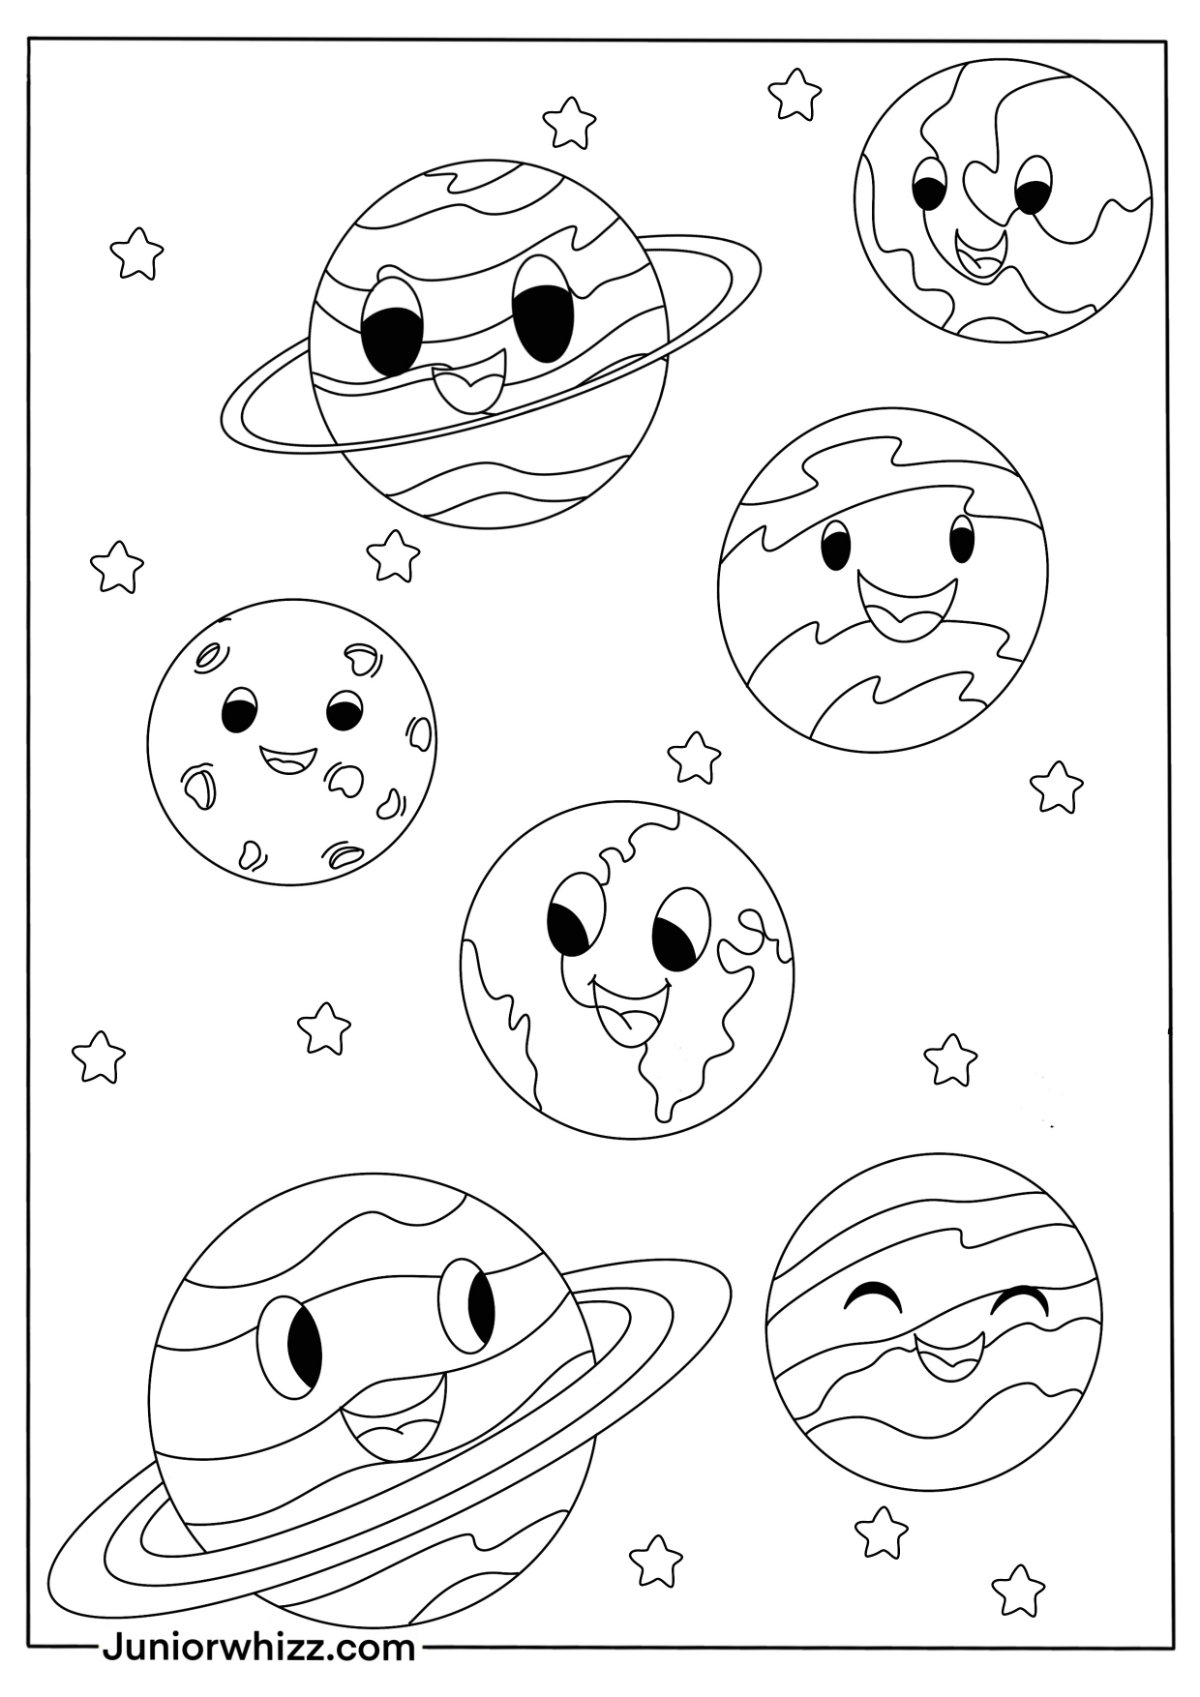 Planets Coloring Pages for Kids (12 Free Printable PDFs)